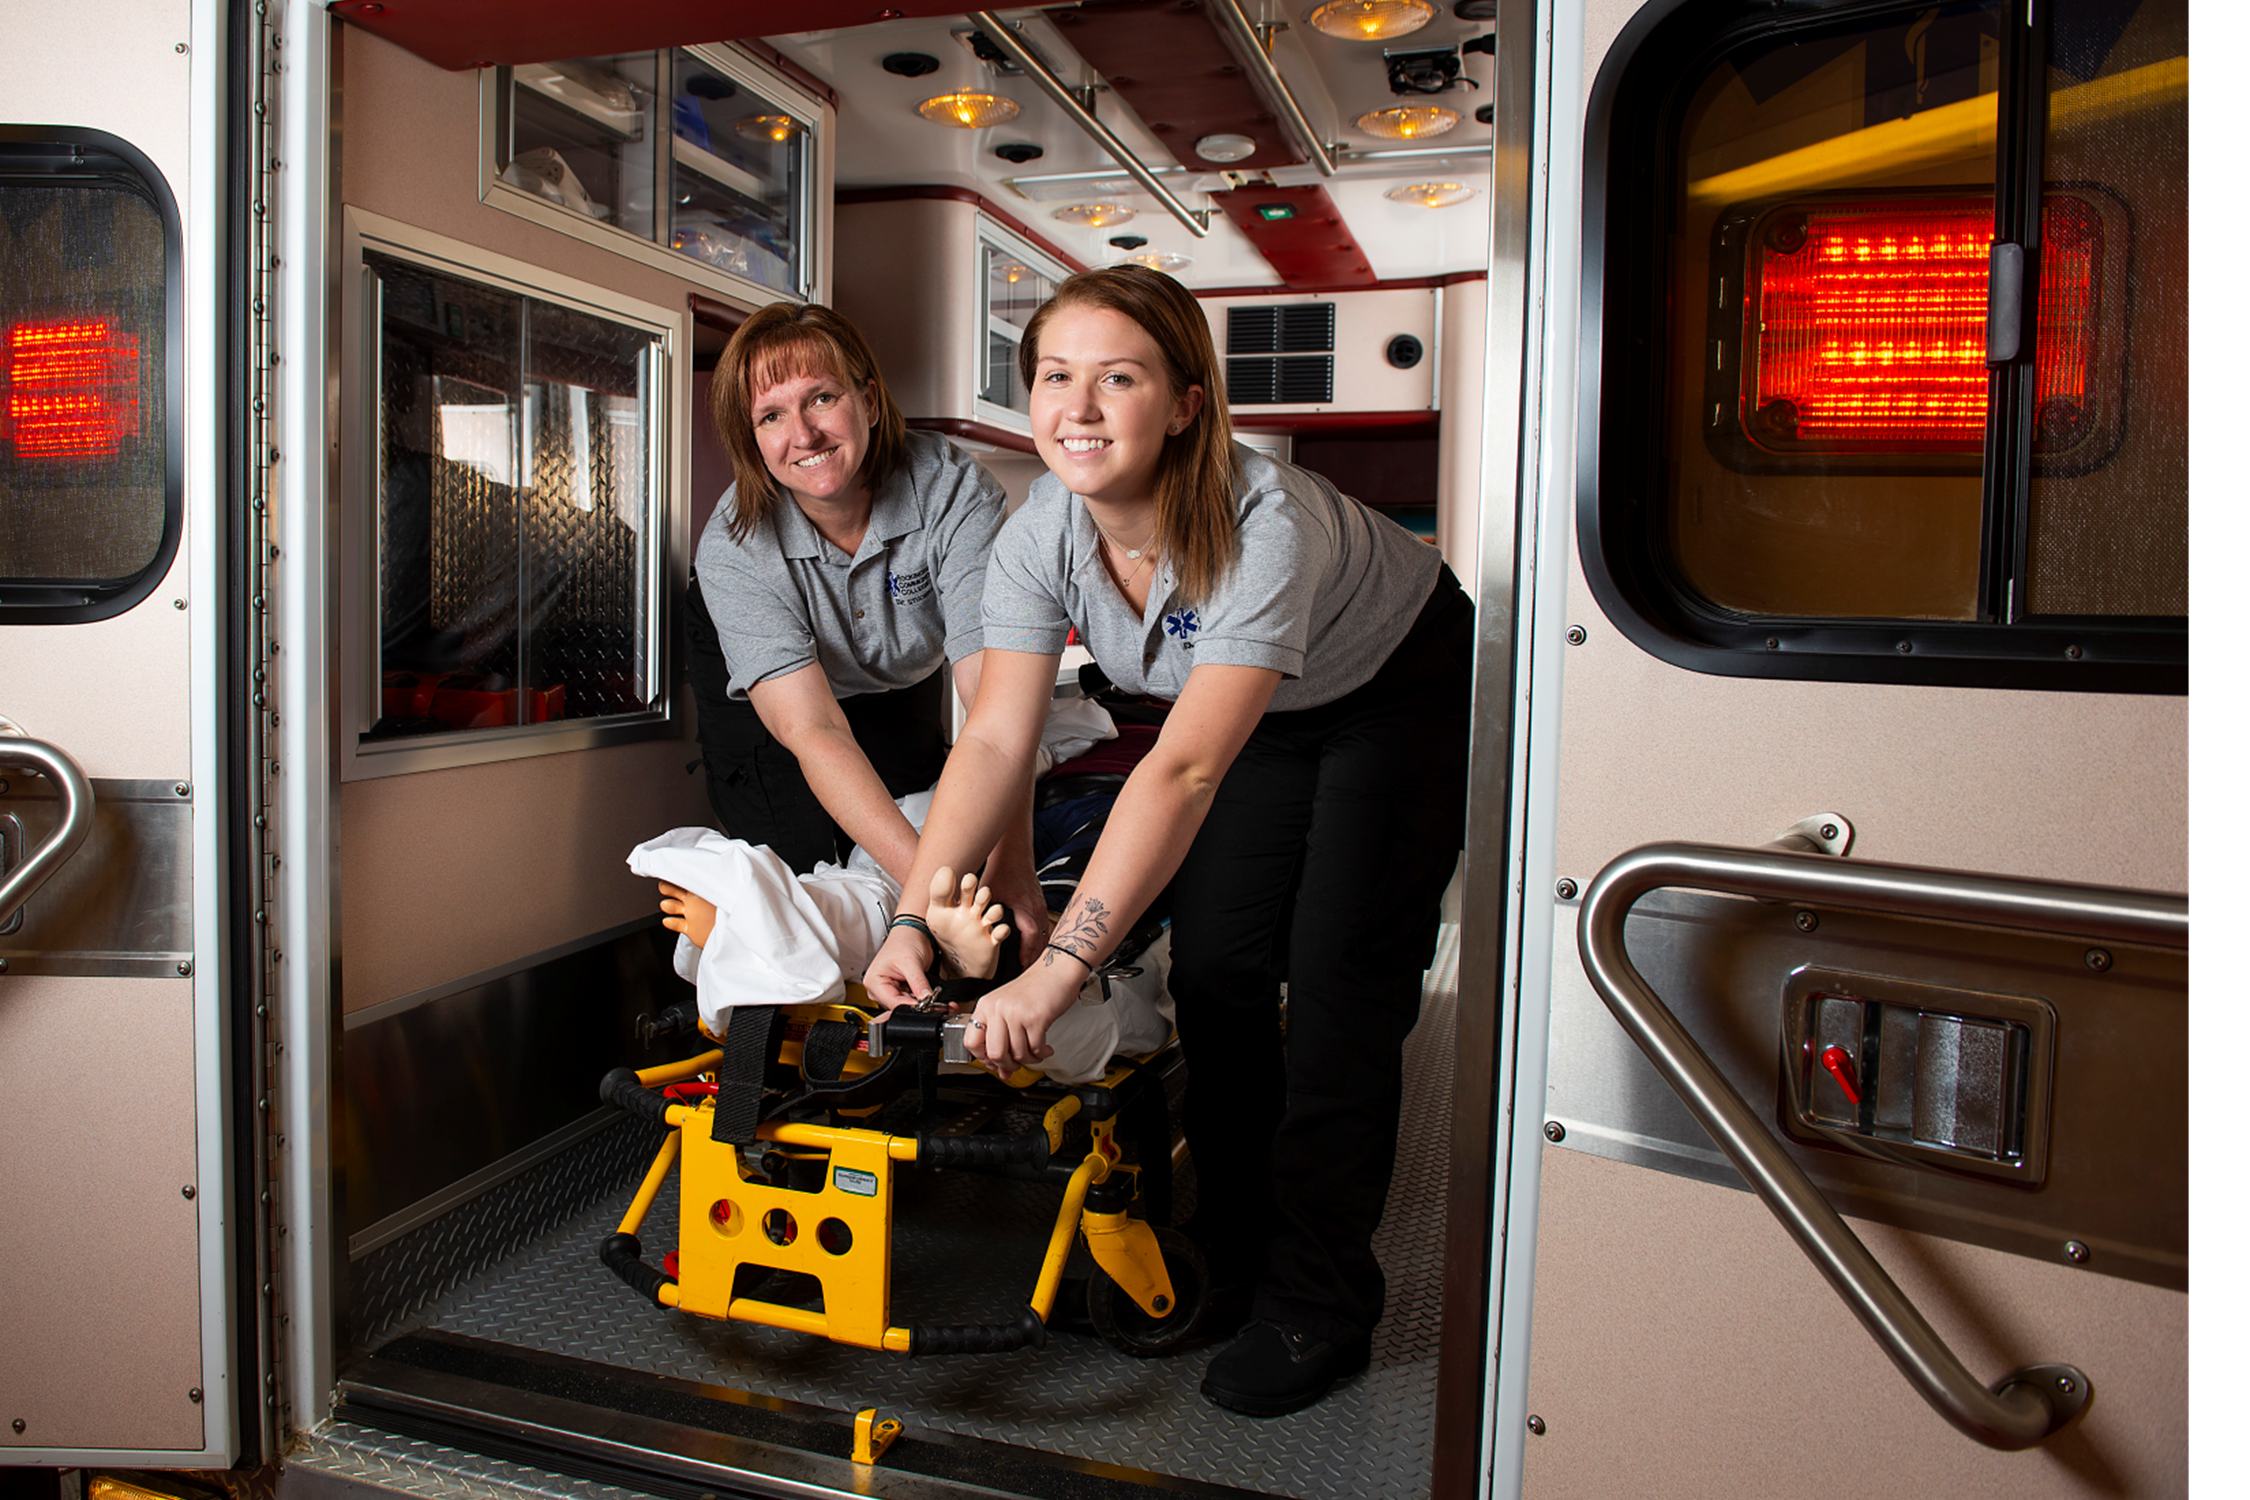 Two medical students practicing on a manikin in an ambulance.